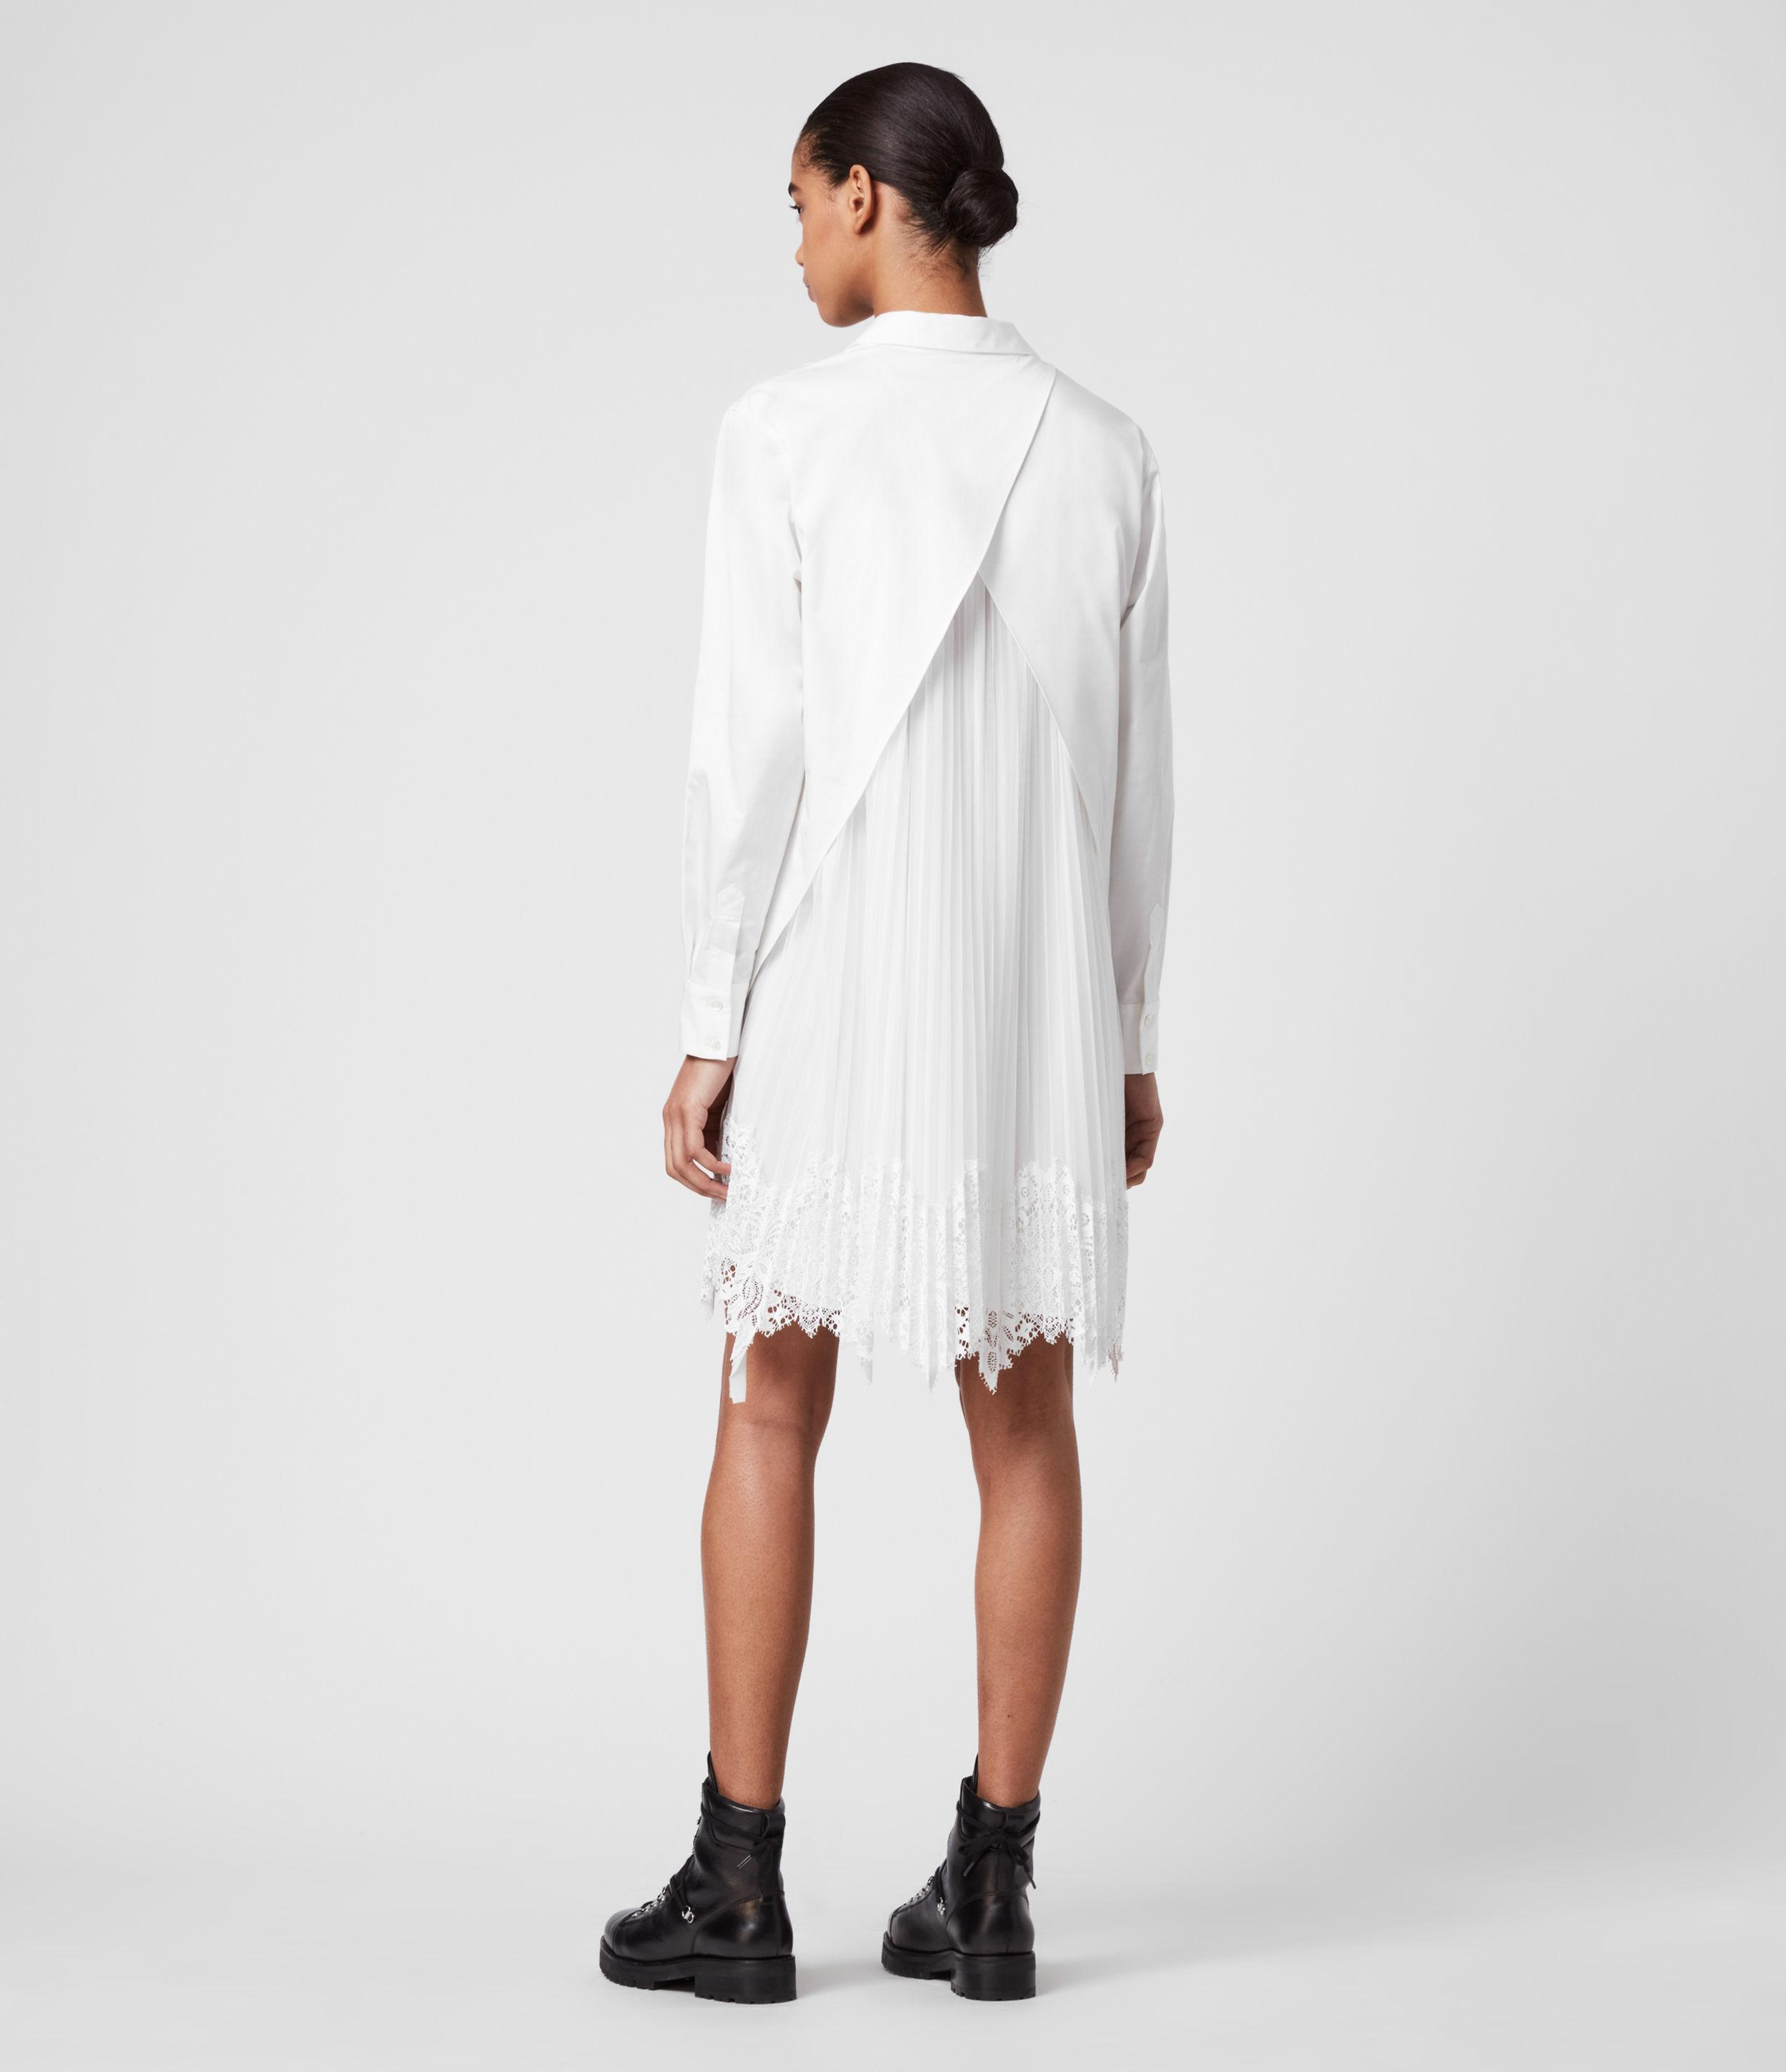 AllSaints Women's Cotton Relaxed Fit Iris Lace Shirt Dress in White